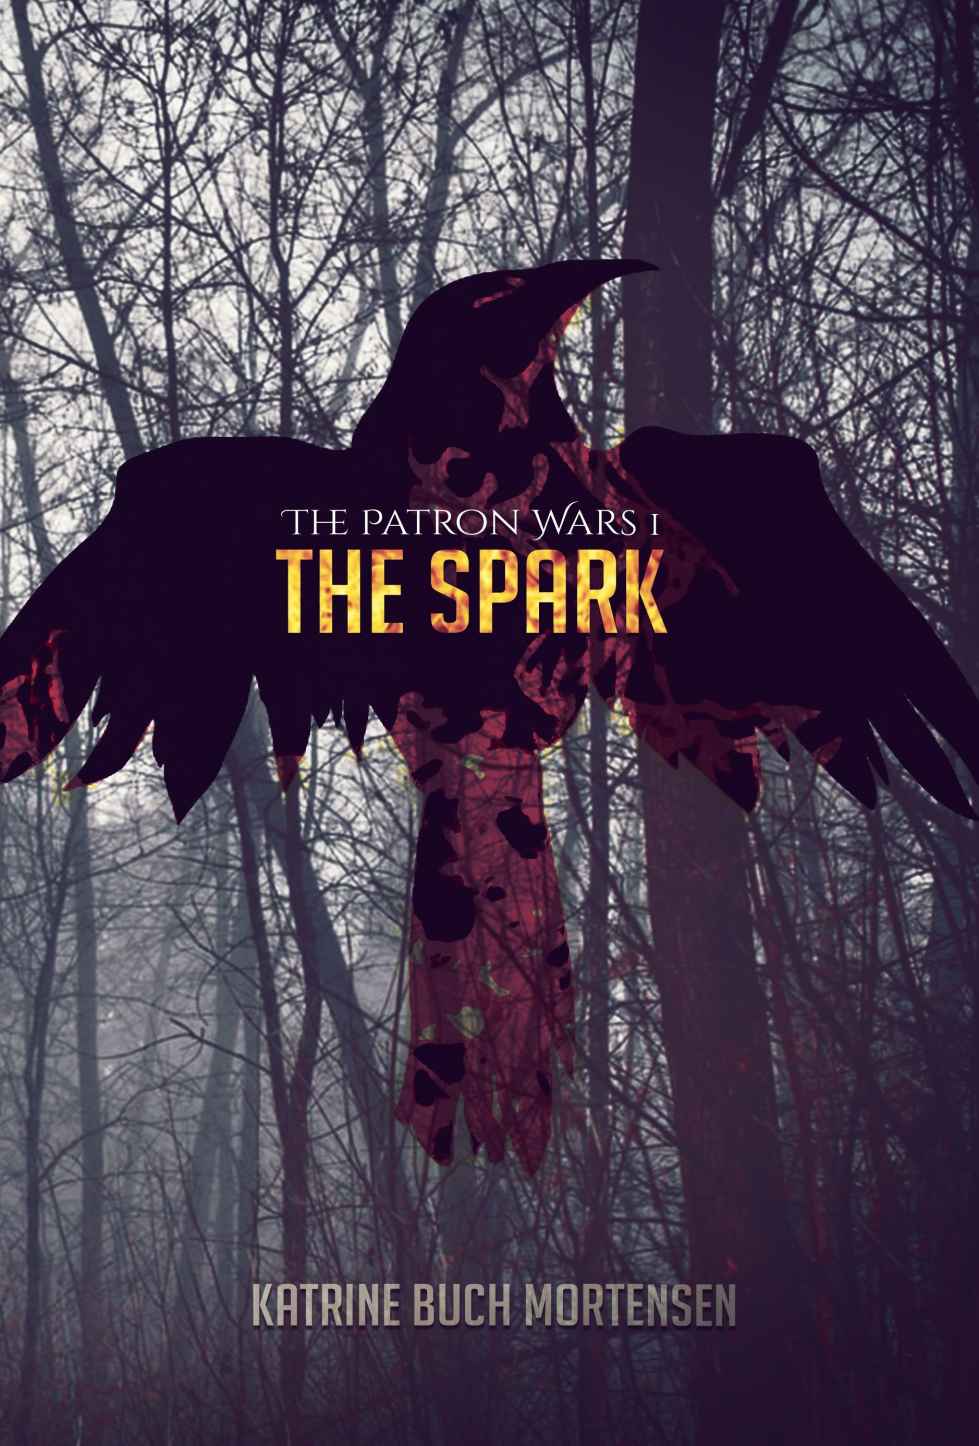 The Spark (The Patron Wars Book 1)